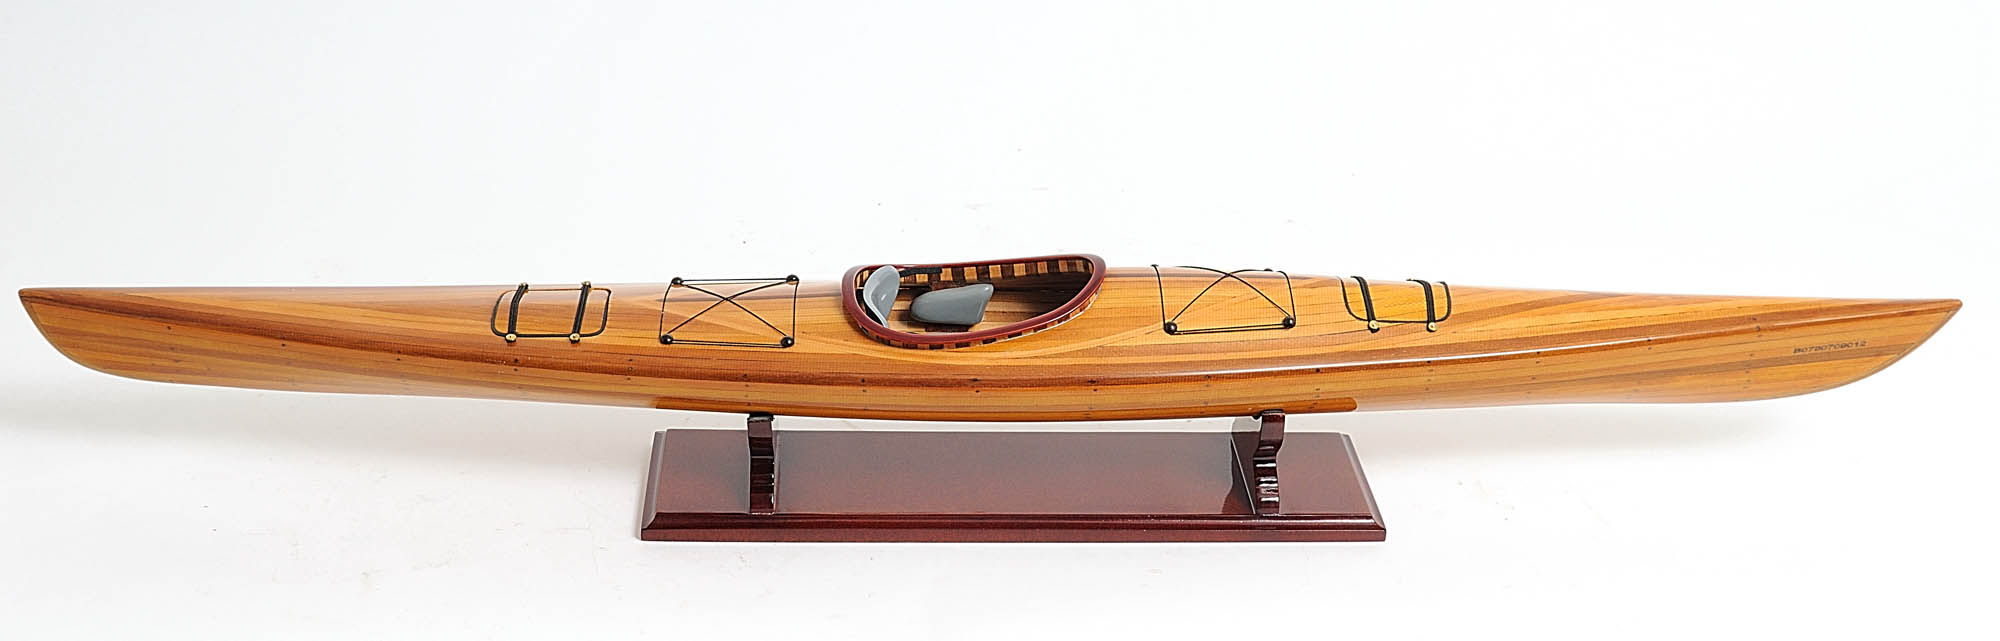 Buy wooden kayak model for home décor - Wooden Boat USA